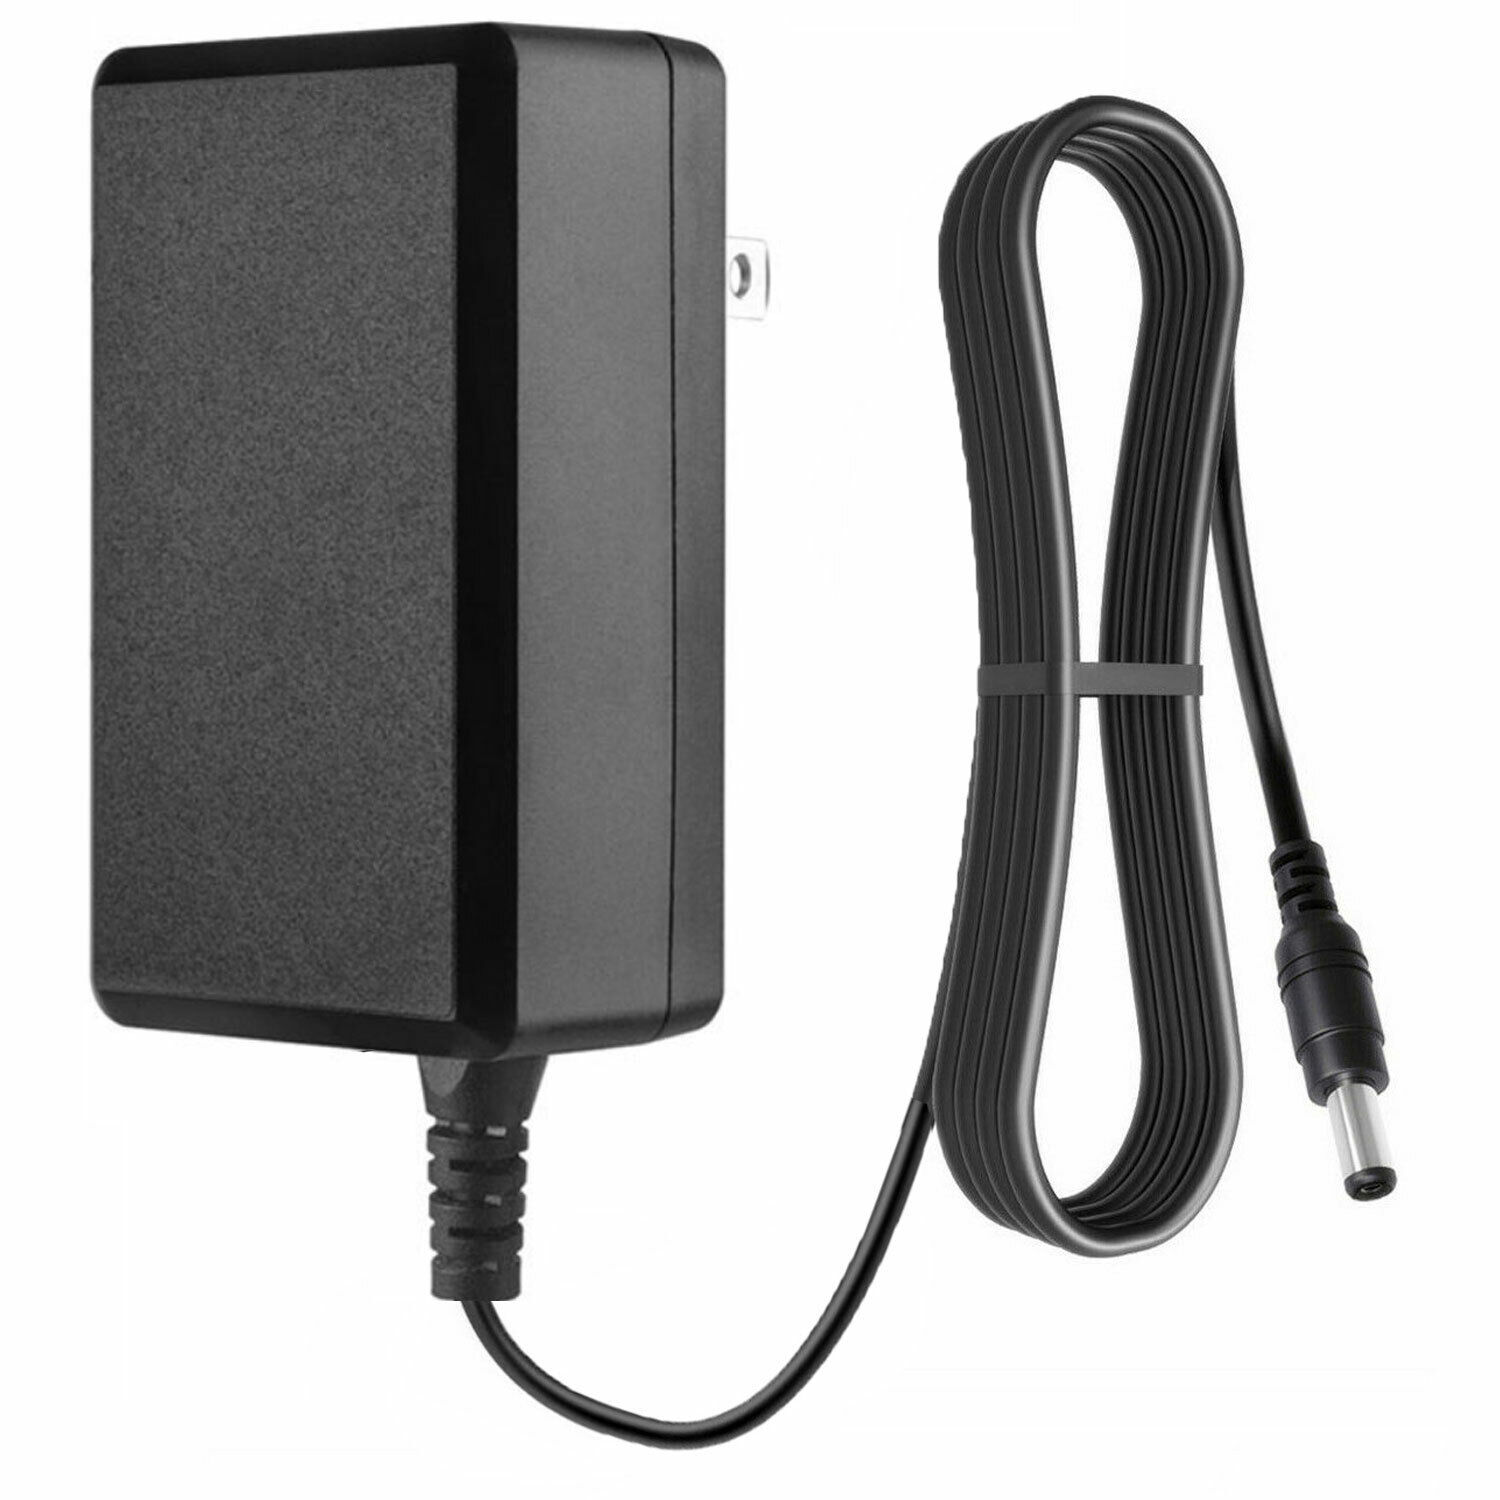 *Brand NEW*For Govee T1 TV LED Backlights H6199 Camera Smart RGBIC Power Charger AC Adapter